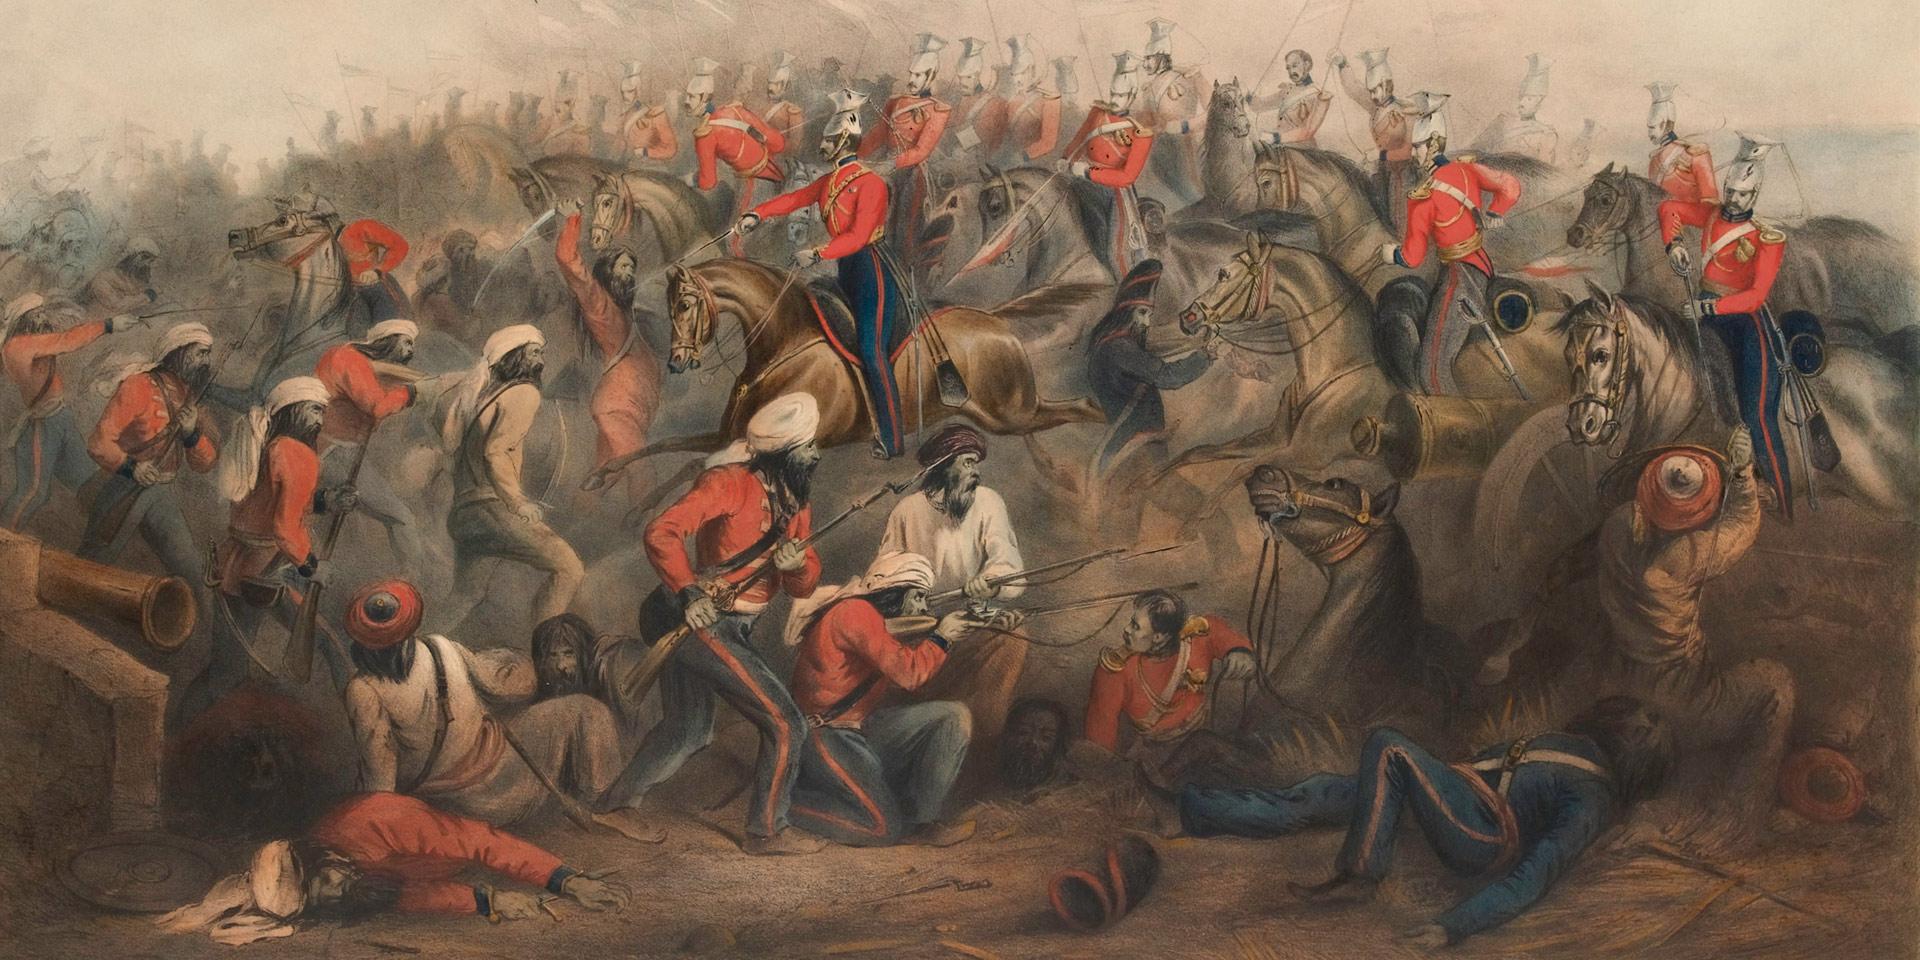 Sikhs Punjab in the Time of War